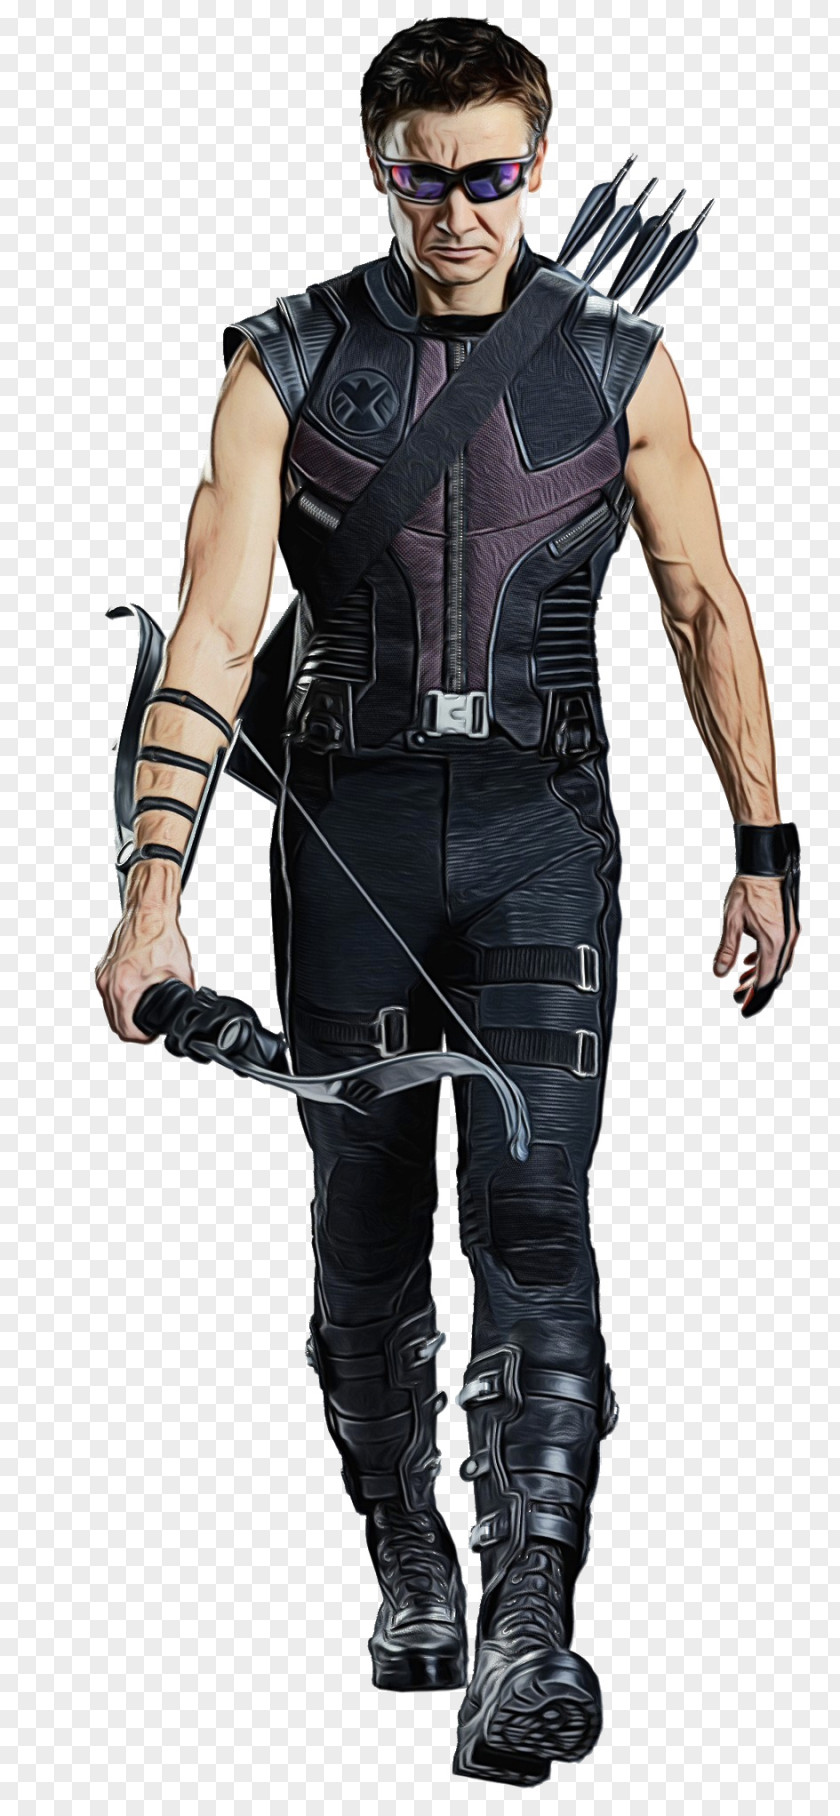 Jeremy Renner Clint Barton Avengers: Age Of Ultron Black Widow The Avengers PNG